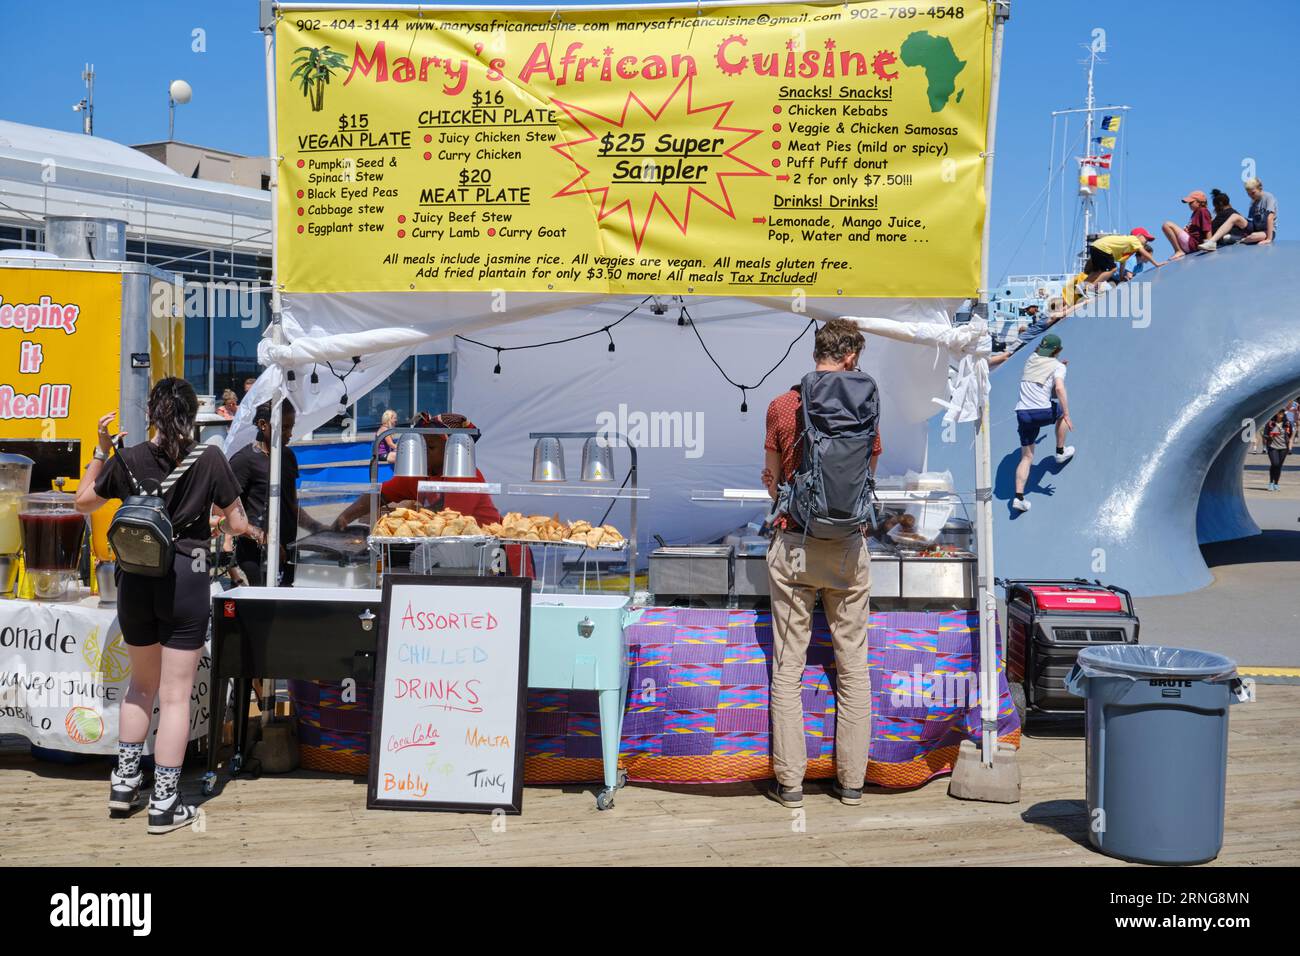 Mary's African Cuisine food stand on the Halifax waterfront during festival, with kids climbing wave in background Stock Photo